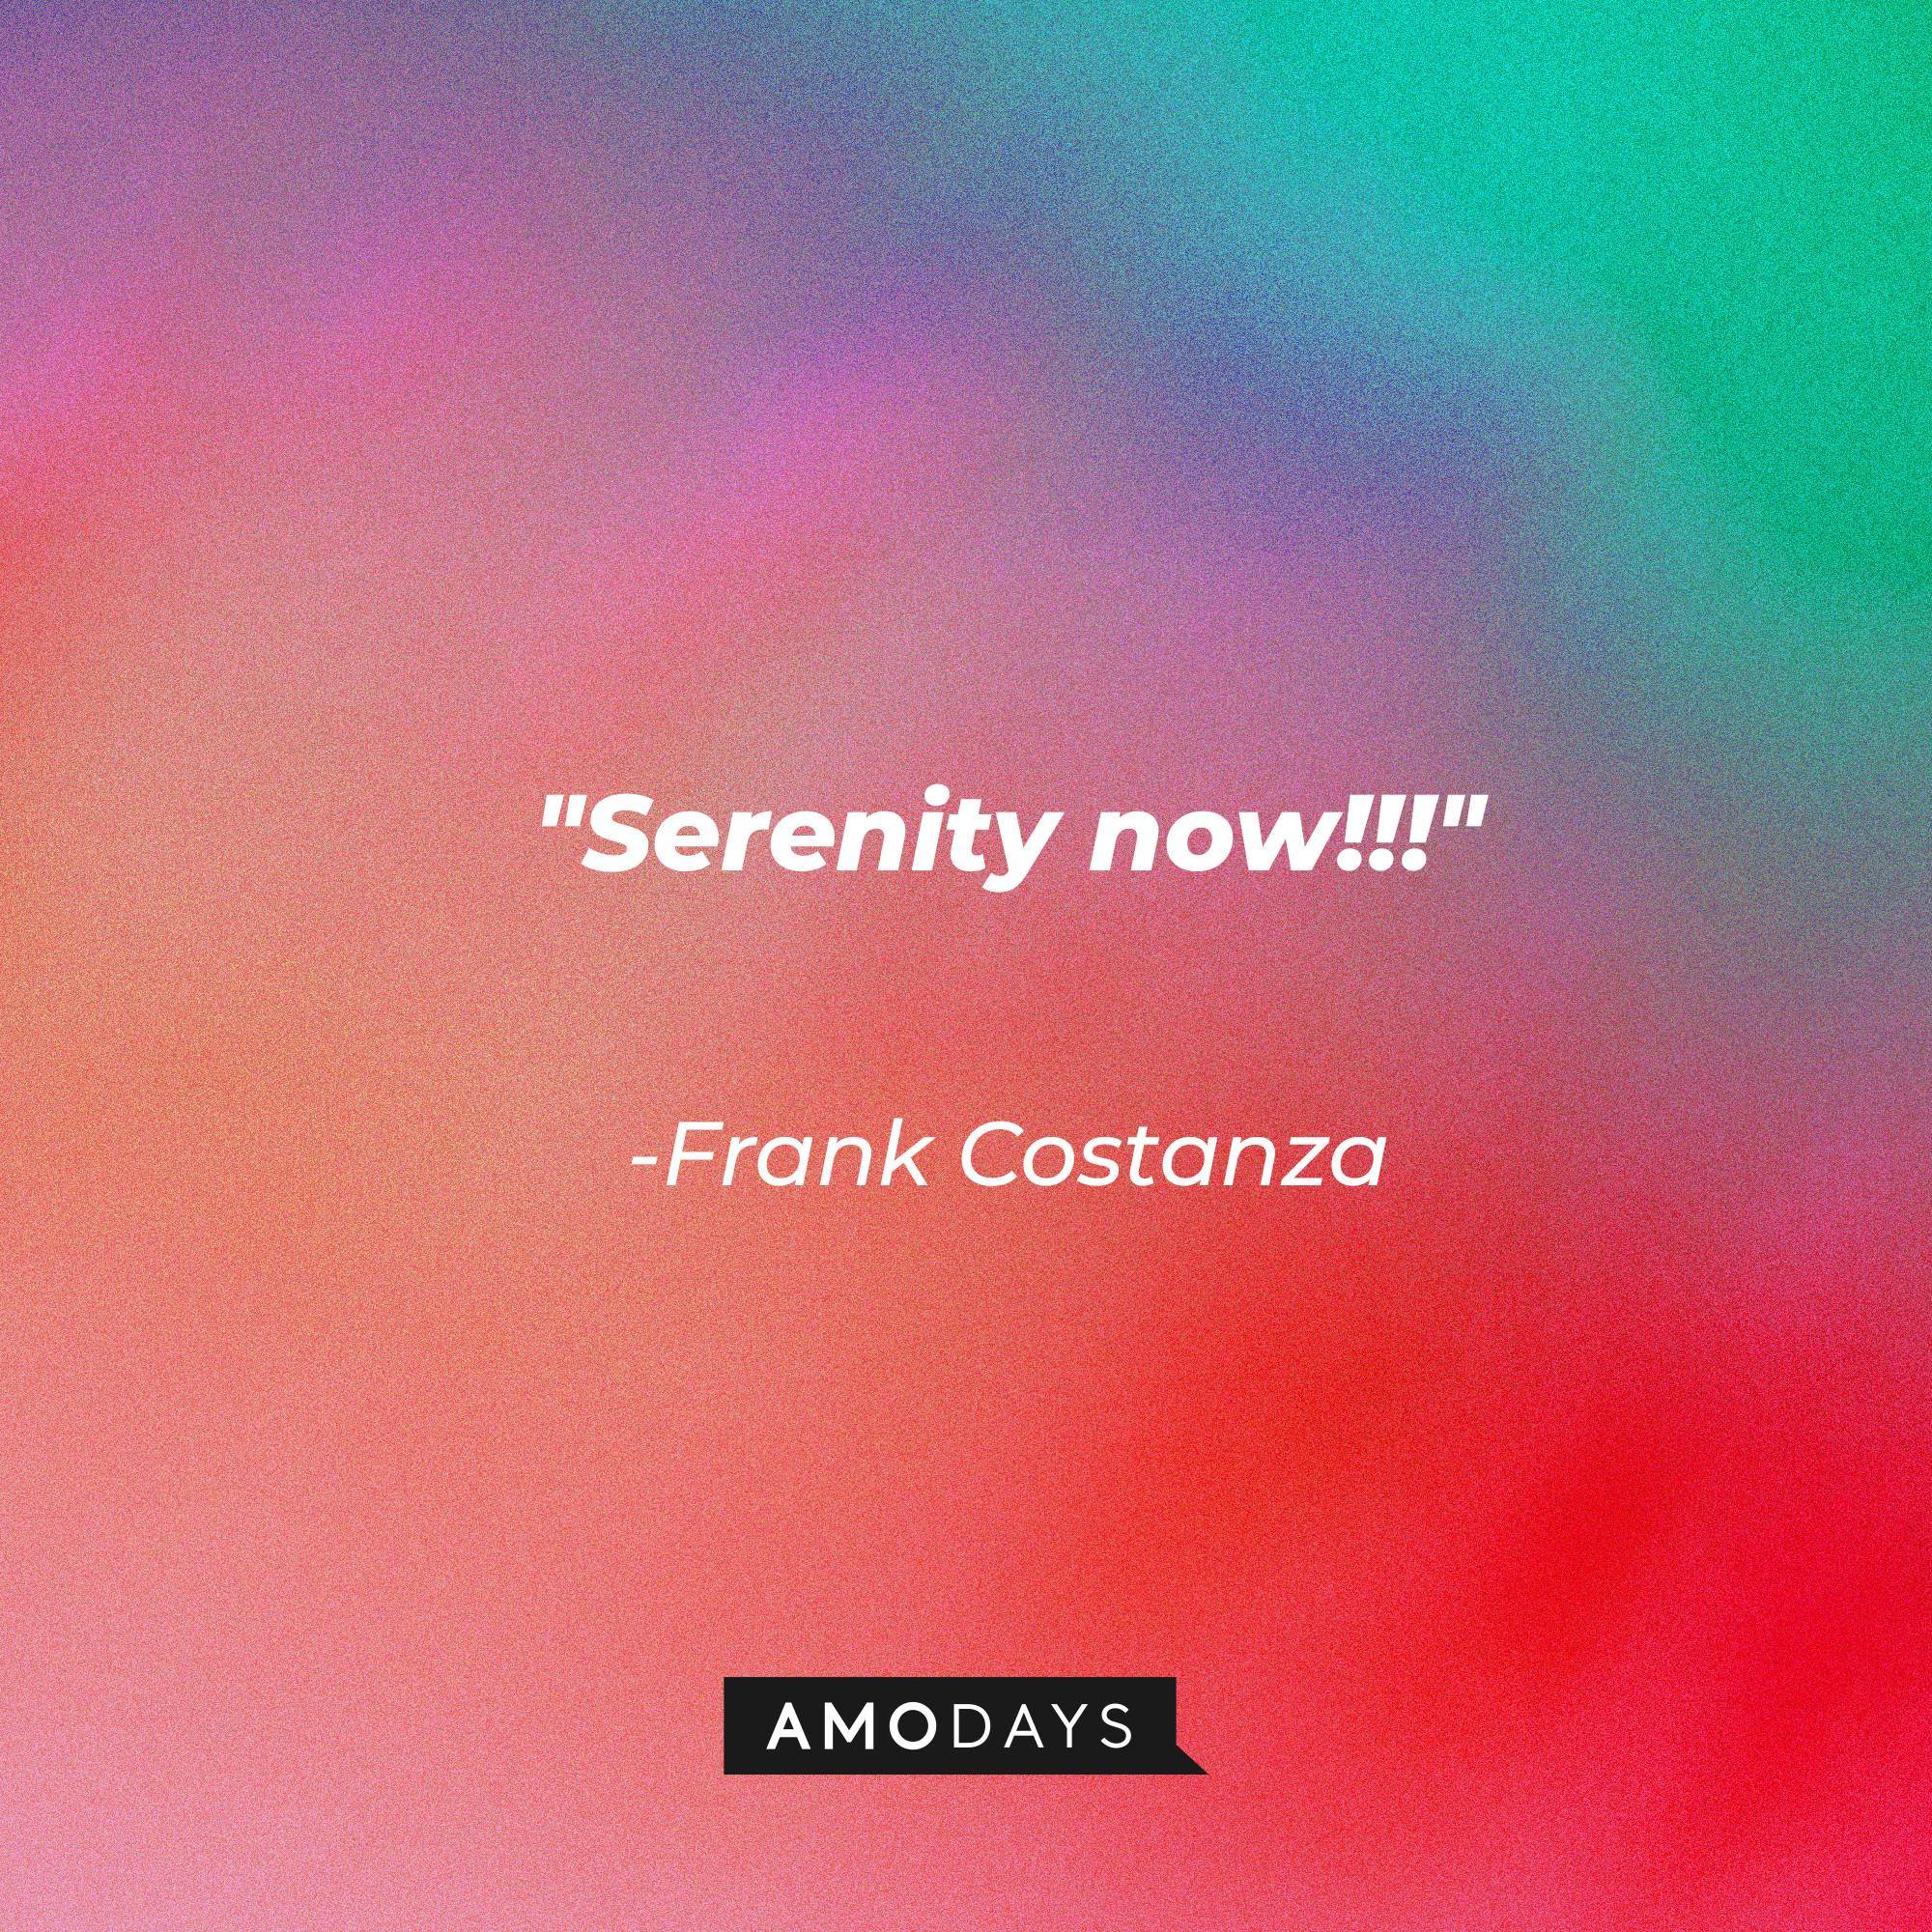 A photo of Frank Costanza's quote, "Serenity now!!!" | Source: Amodays